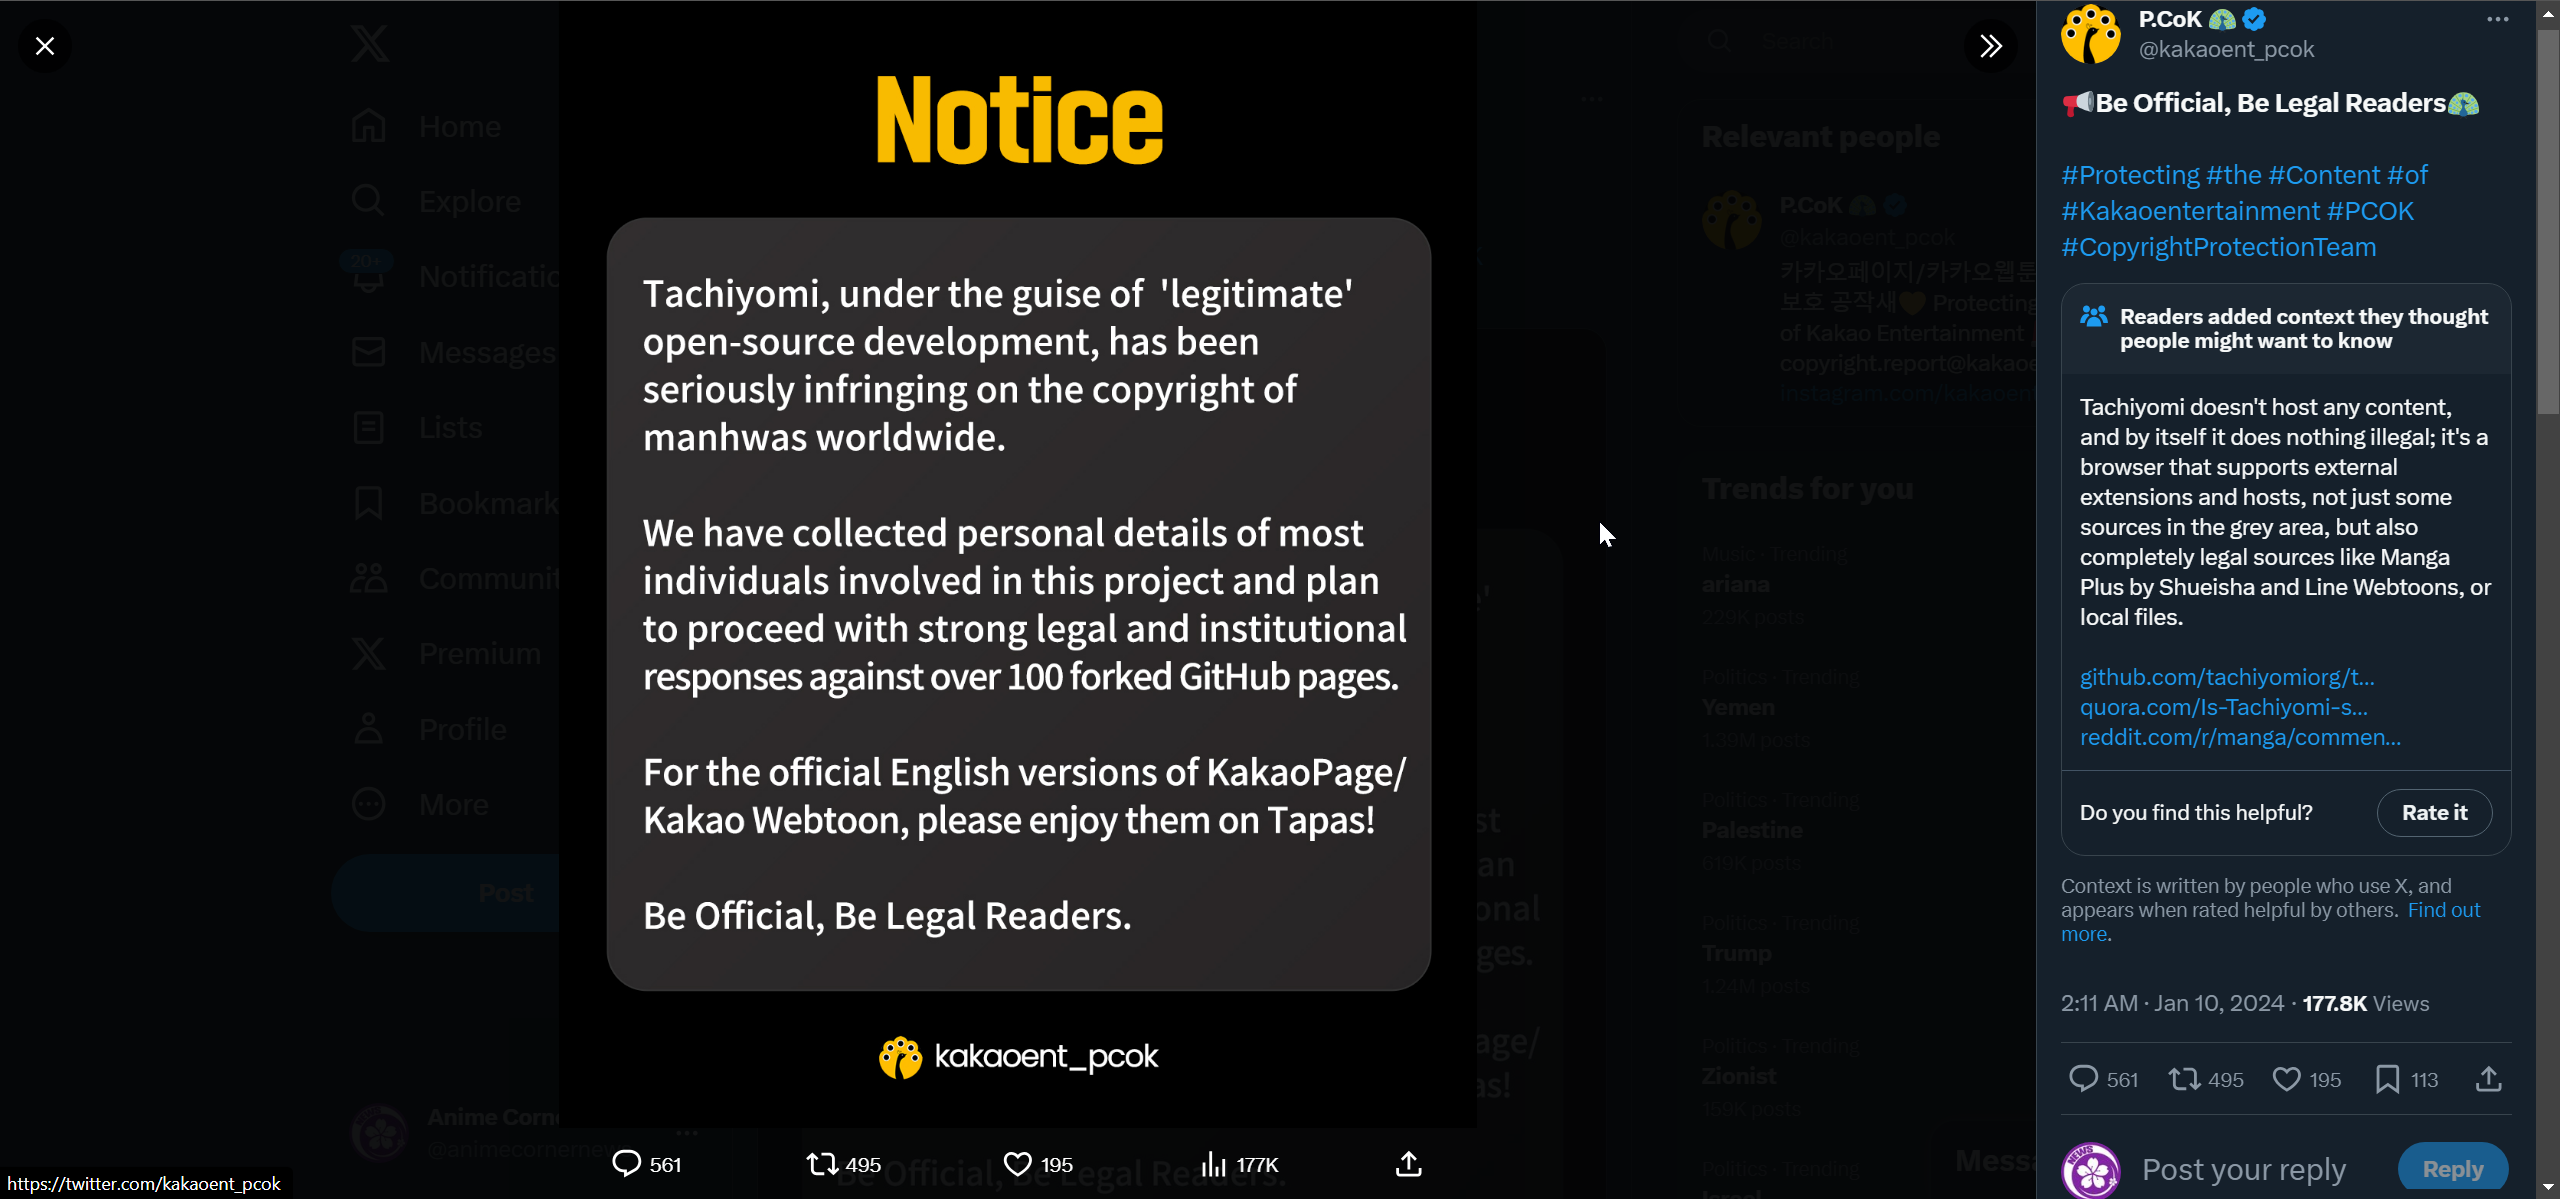 The Tachiyomi group stopped developing the app after Kakao